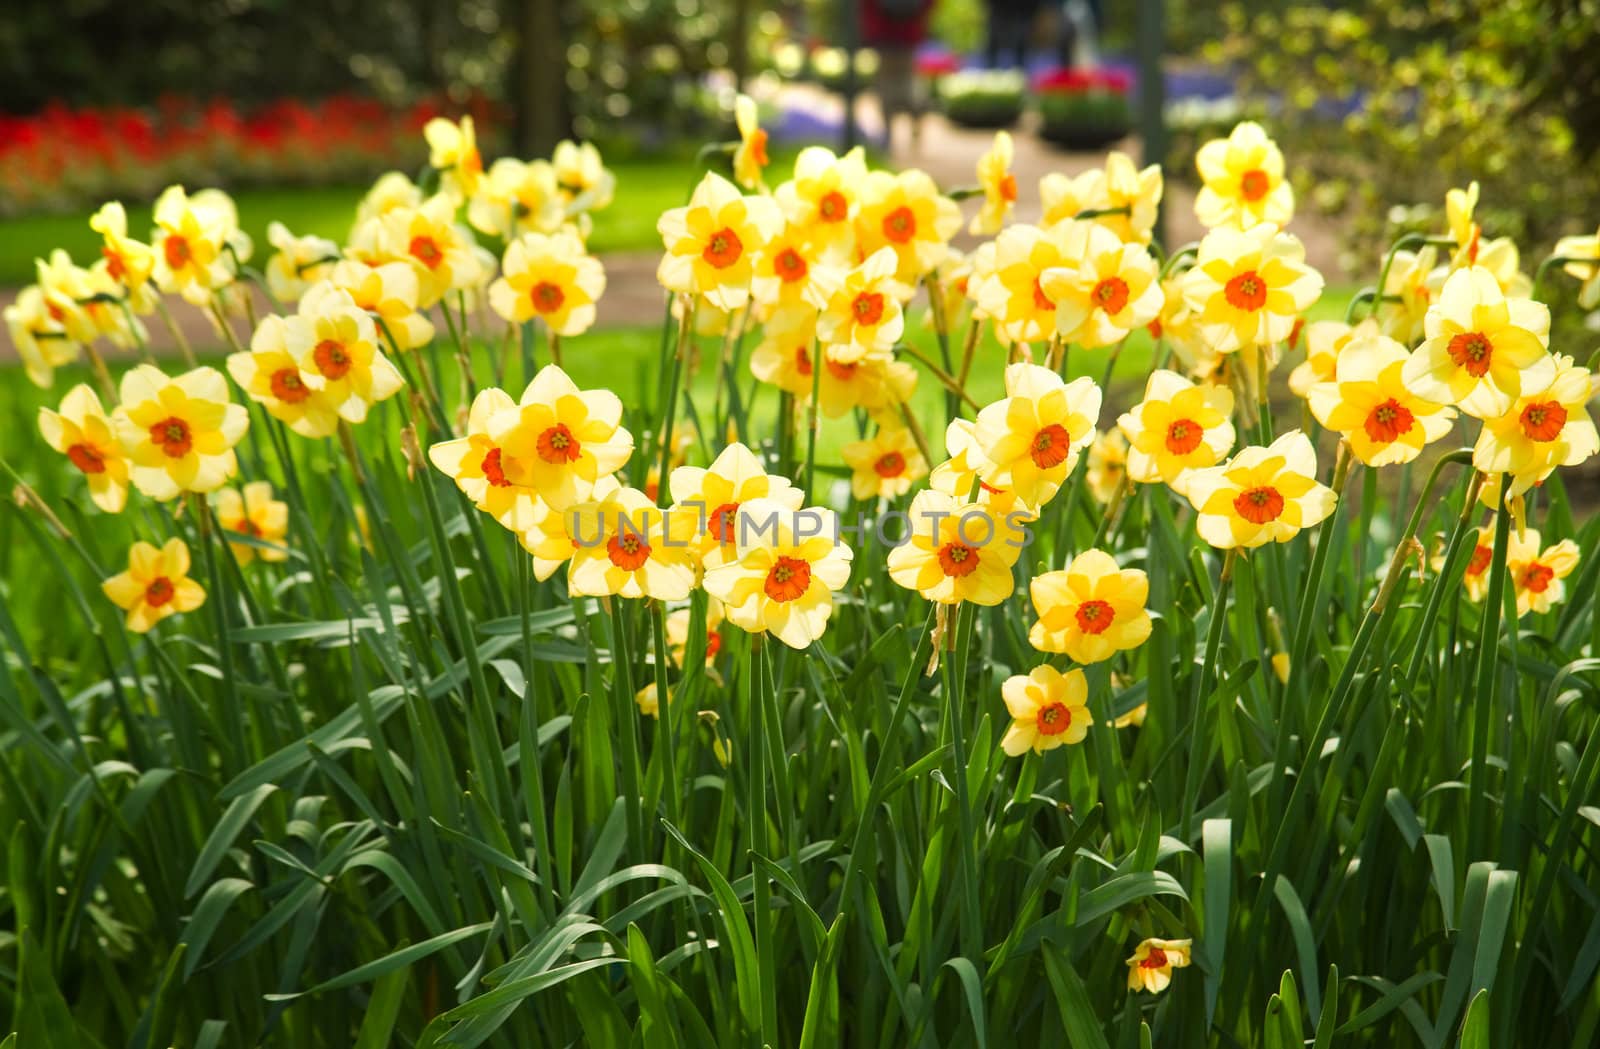 Yellow daffodils in park in spring by Colette